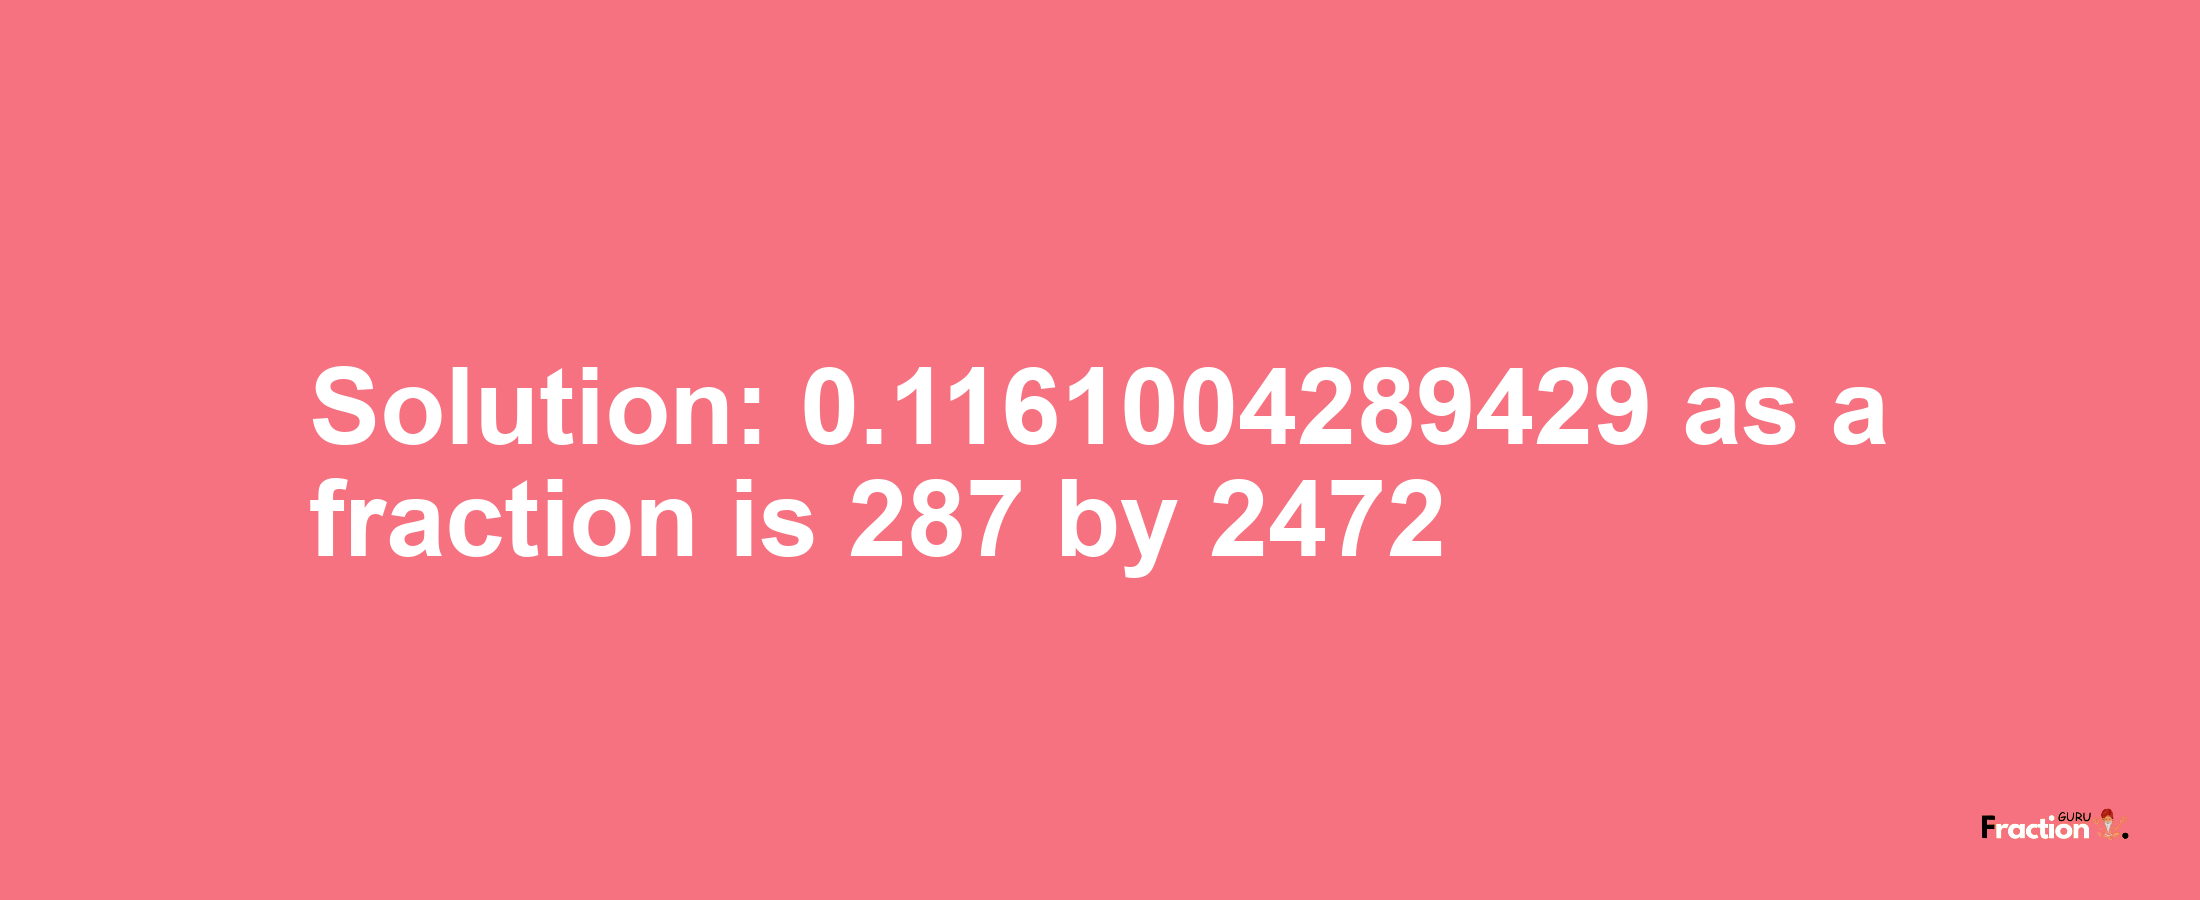 Solution:0.1161004289429 as a fraction is 287/2472